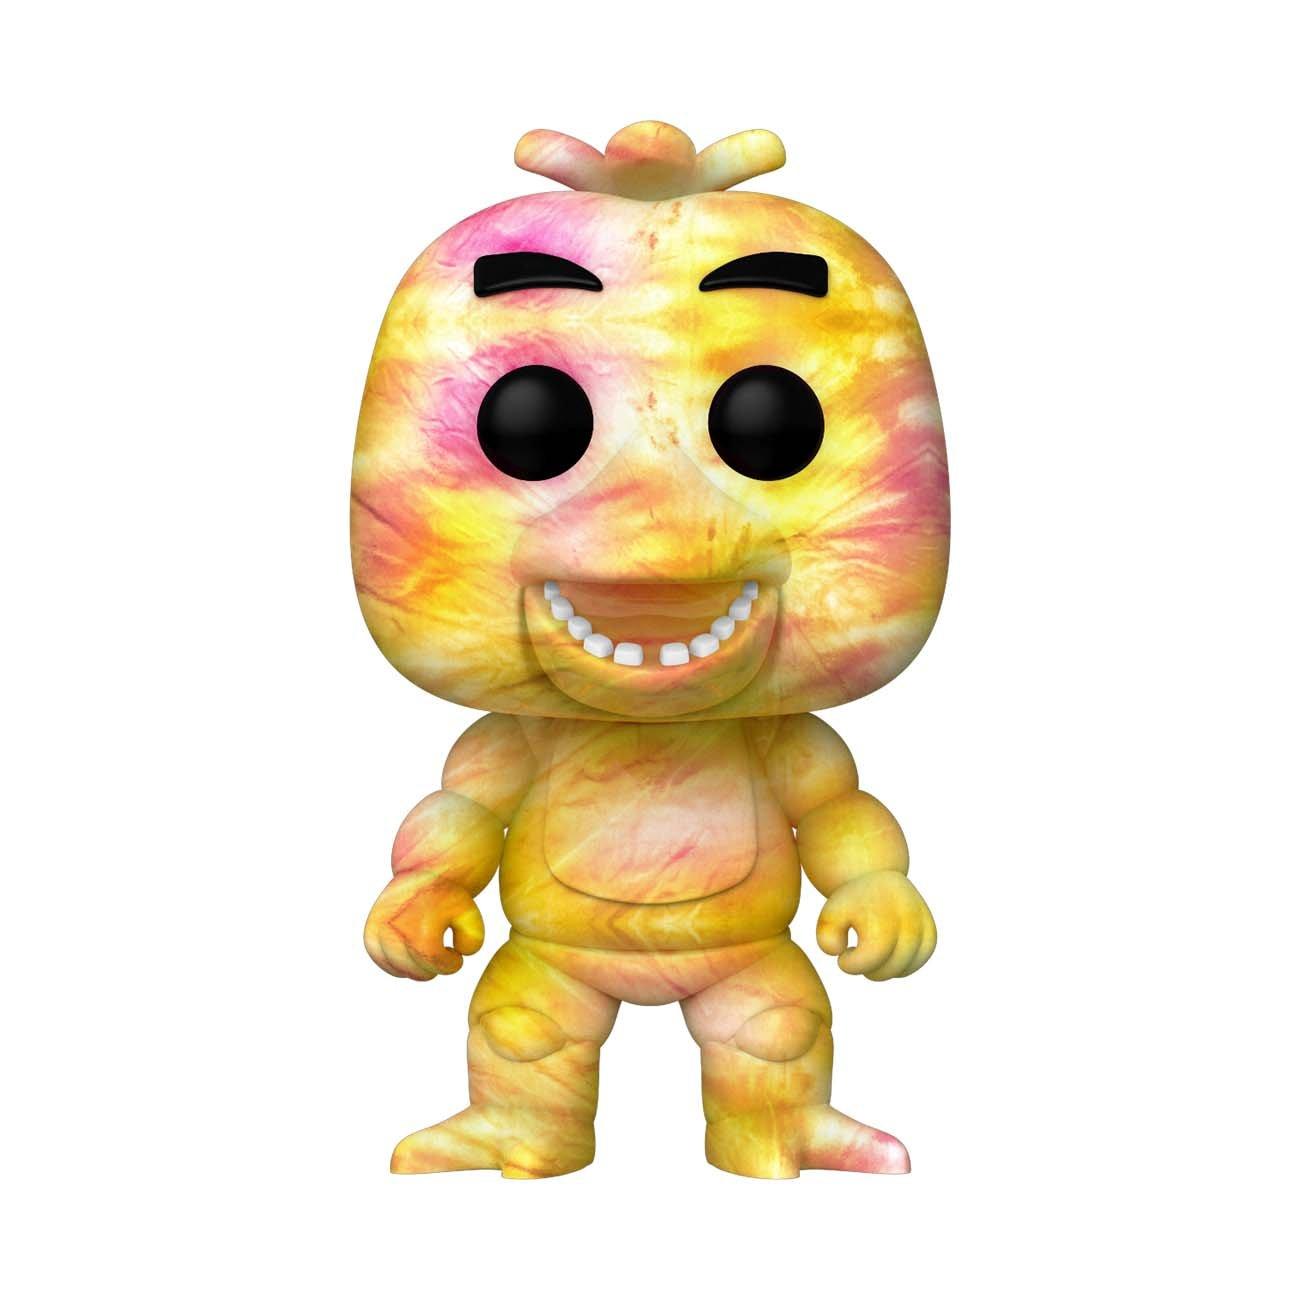 Five Nights at Freddy's Chica 4-Inch Plush Clip On